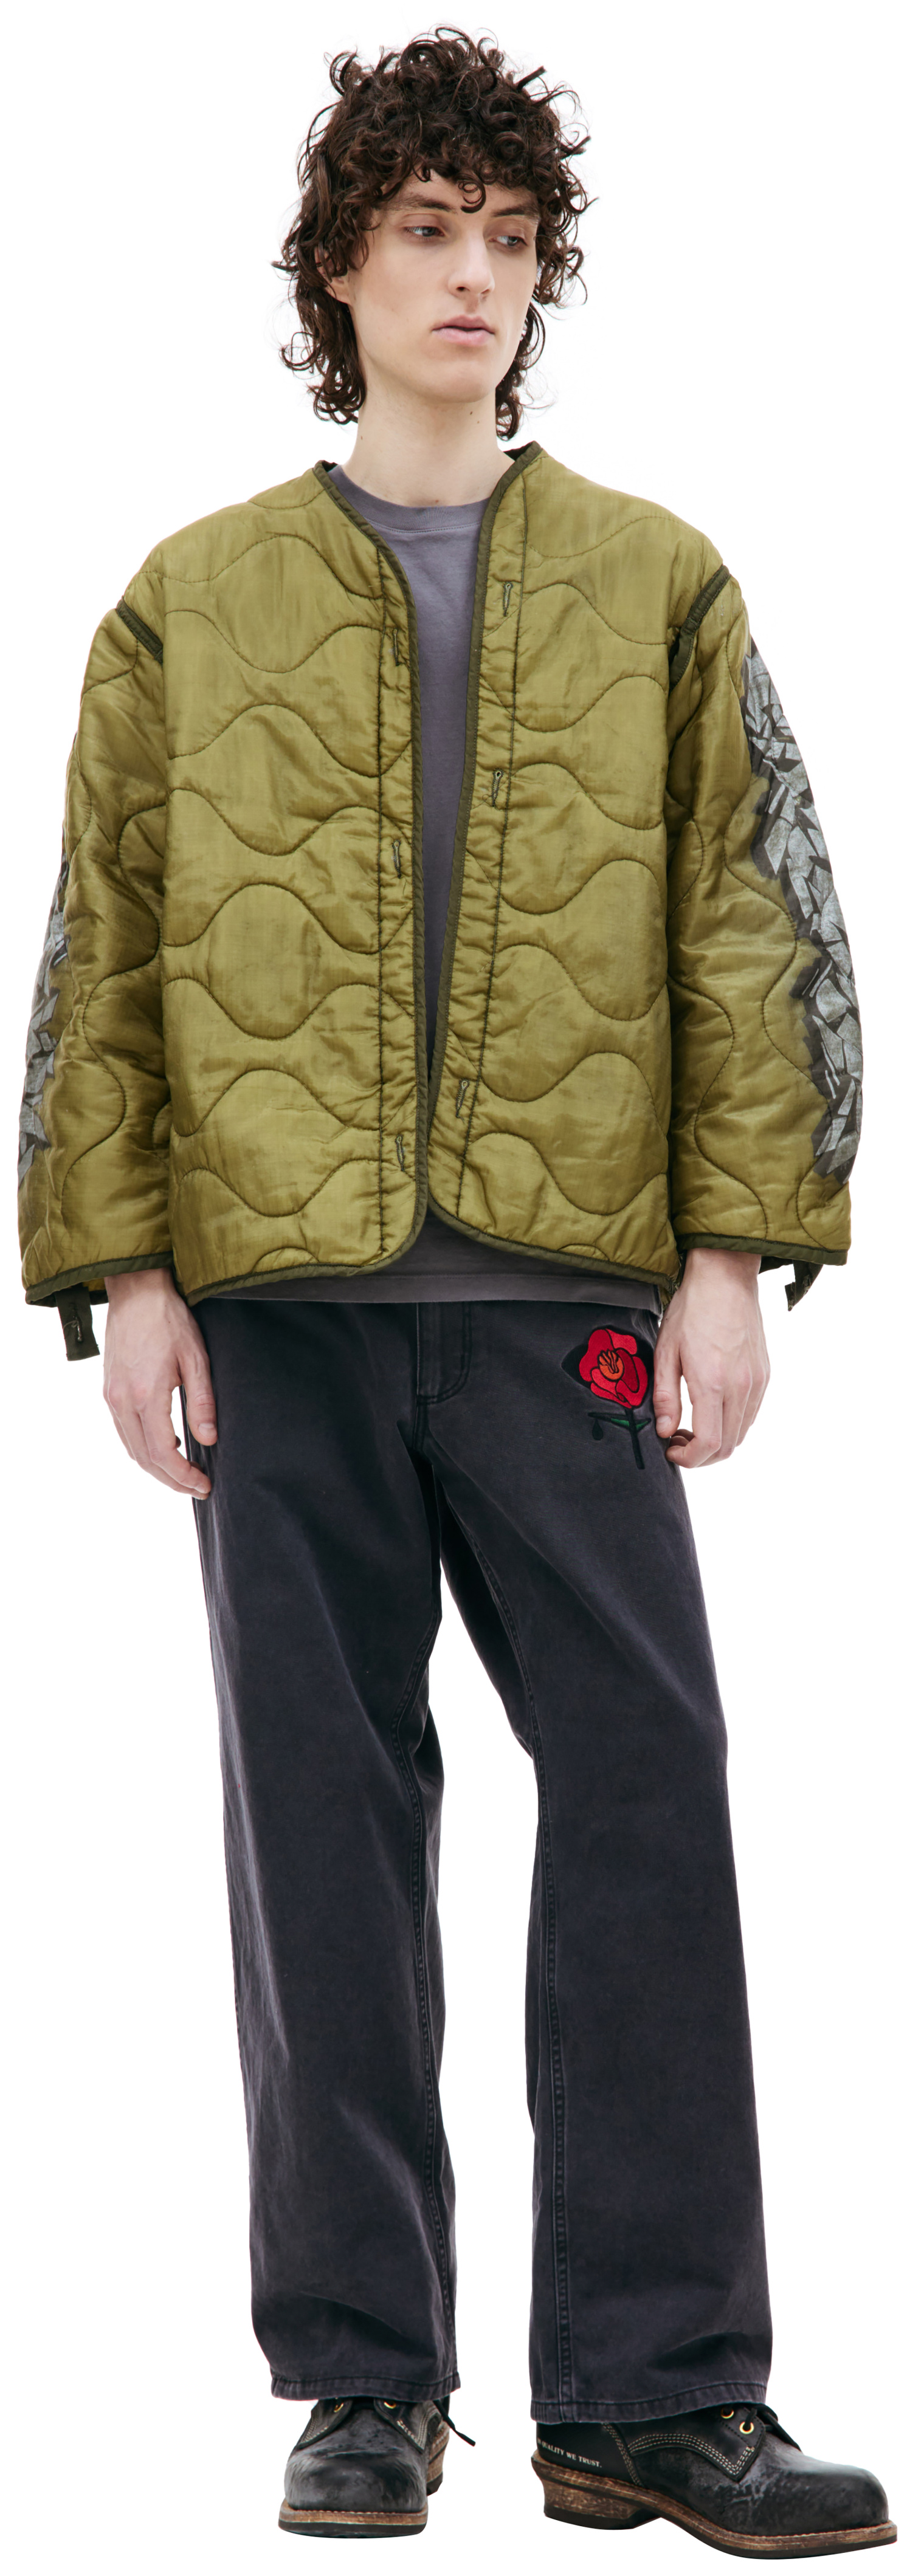 Children of the discordance Quilted jacket with graffiti print